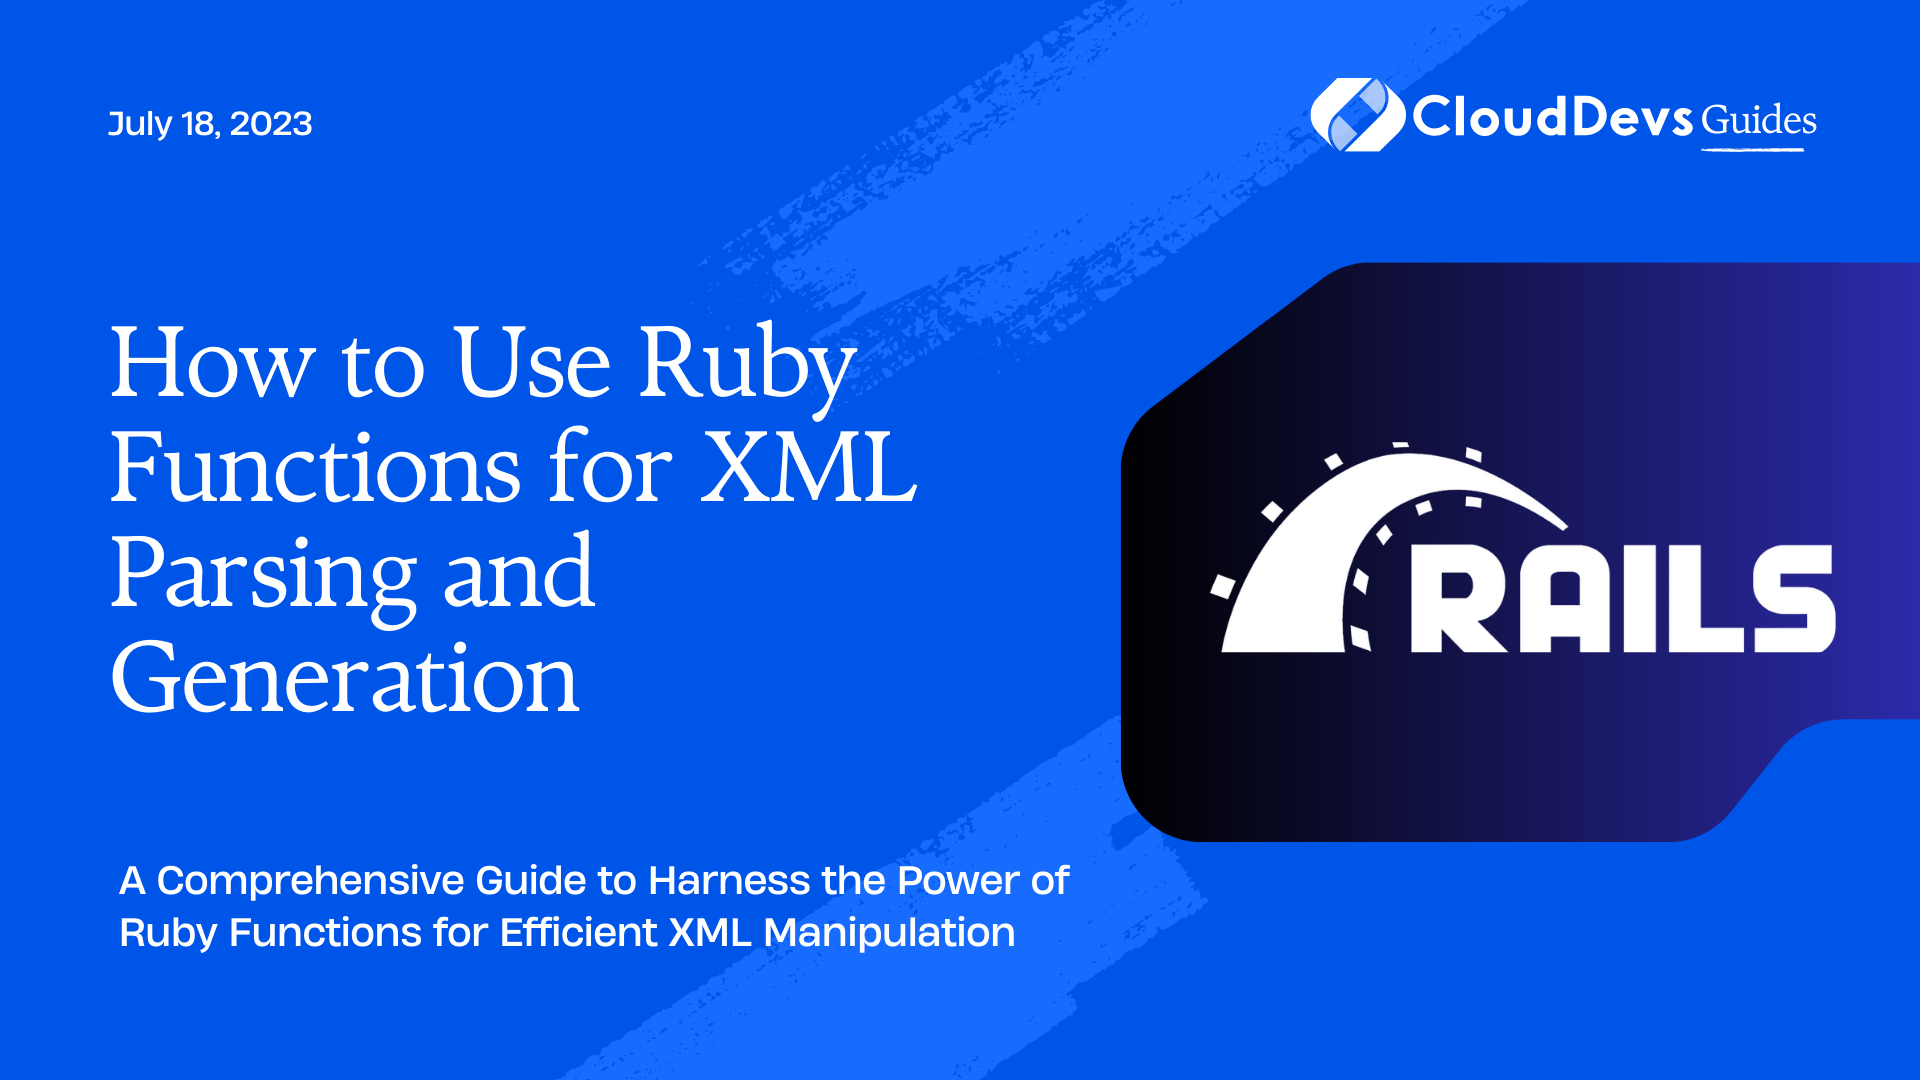 How to Use Ruby Functions for XML Parsing and Generation